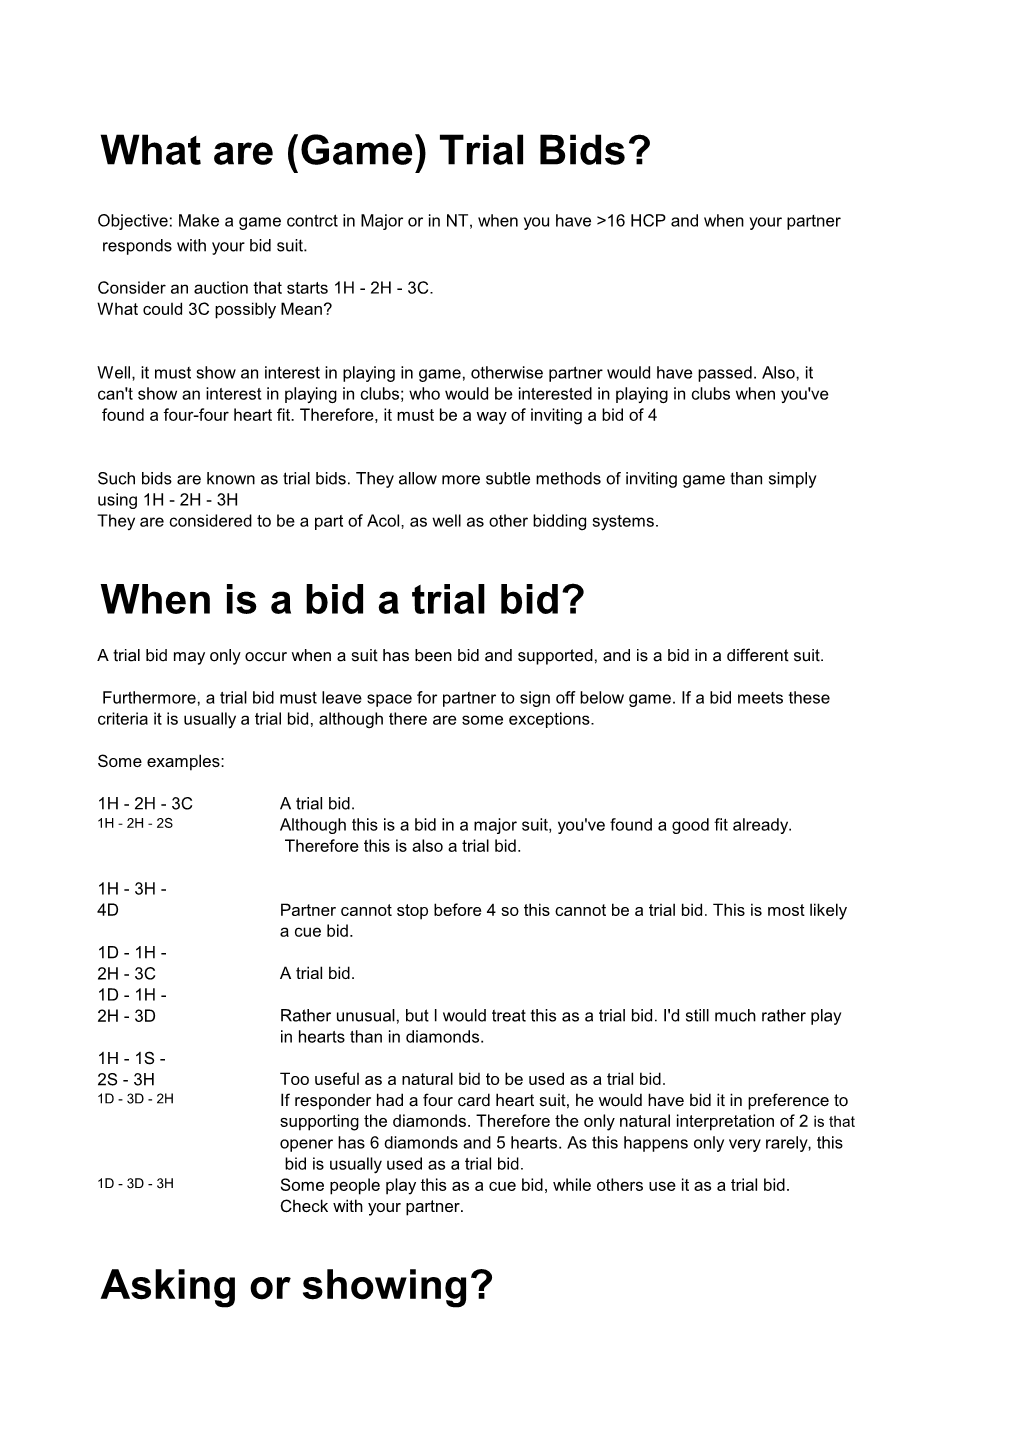 What Are (Game) Trial Bids? When Is a Bid a Trial Bid? Asking Or Showing?